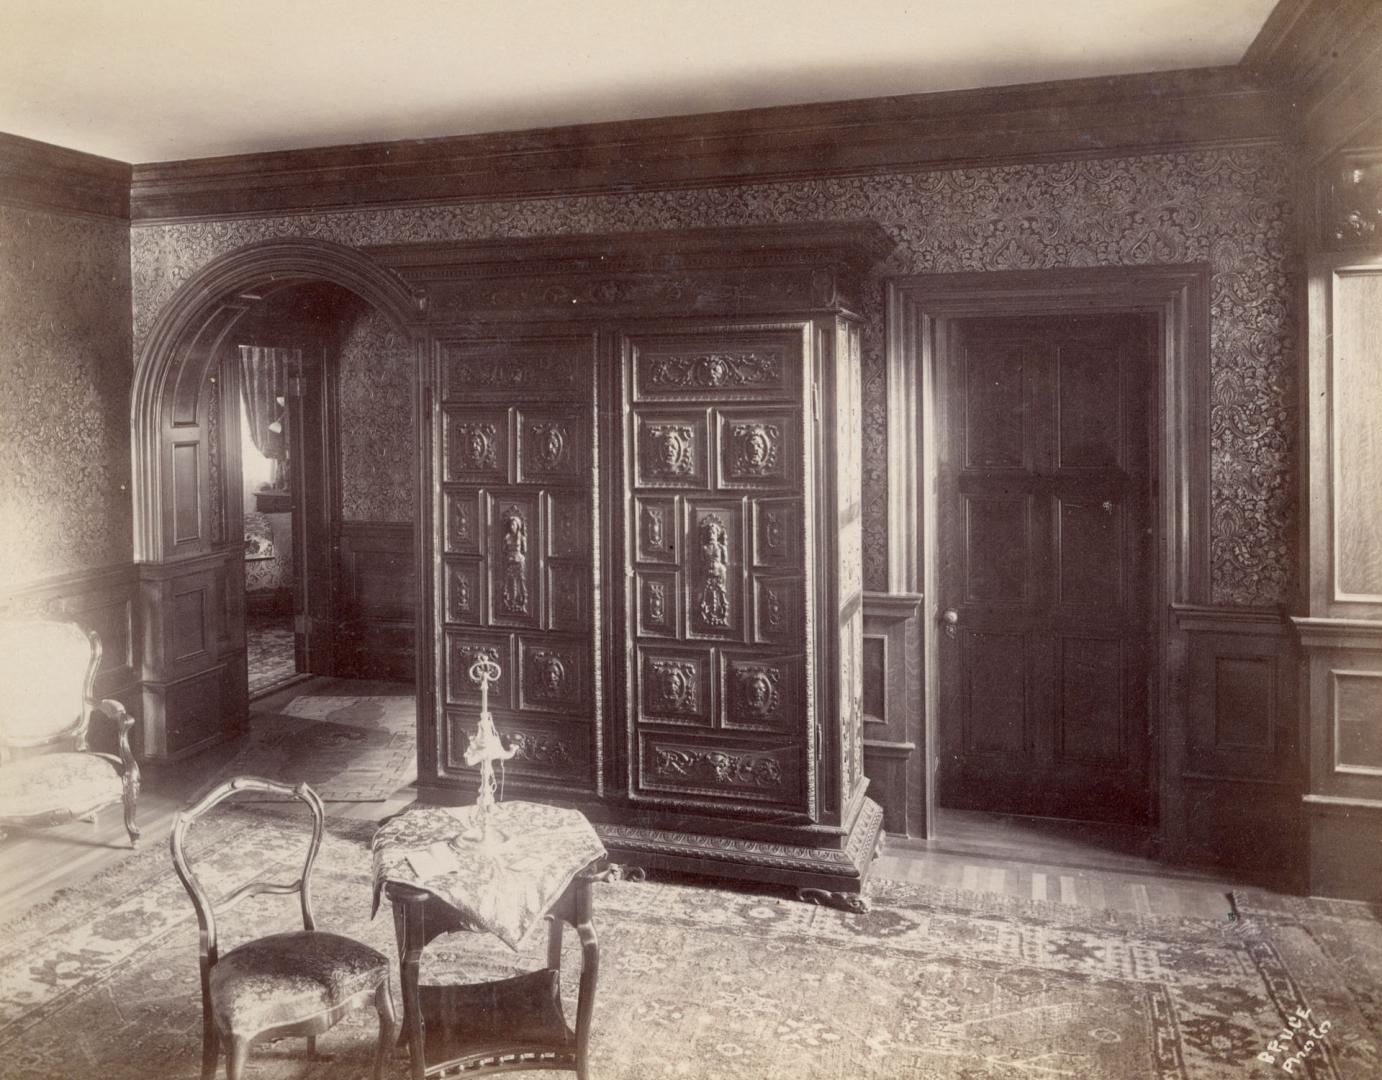 Image shows an interior of the hall inside the house.